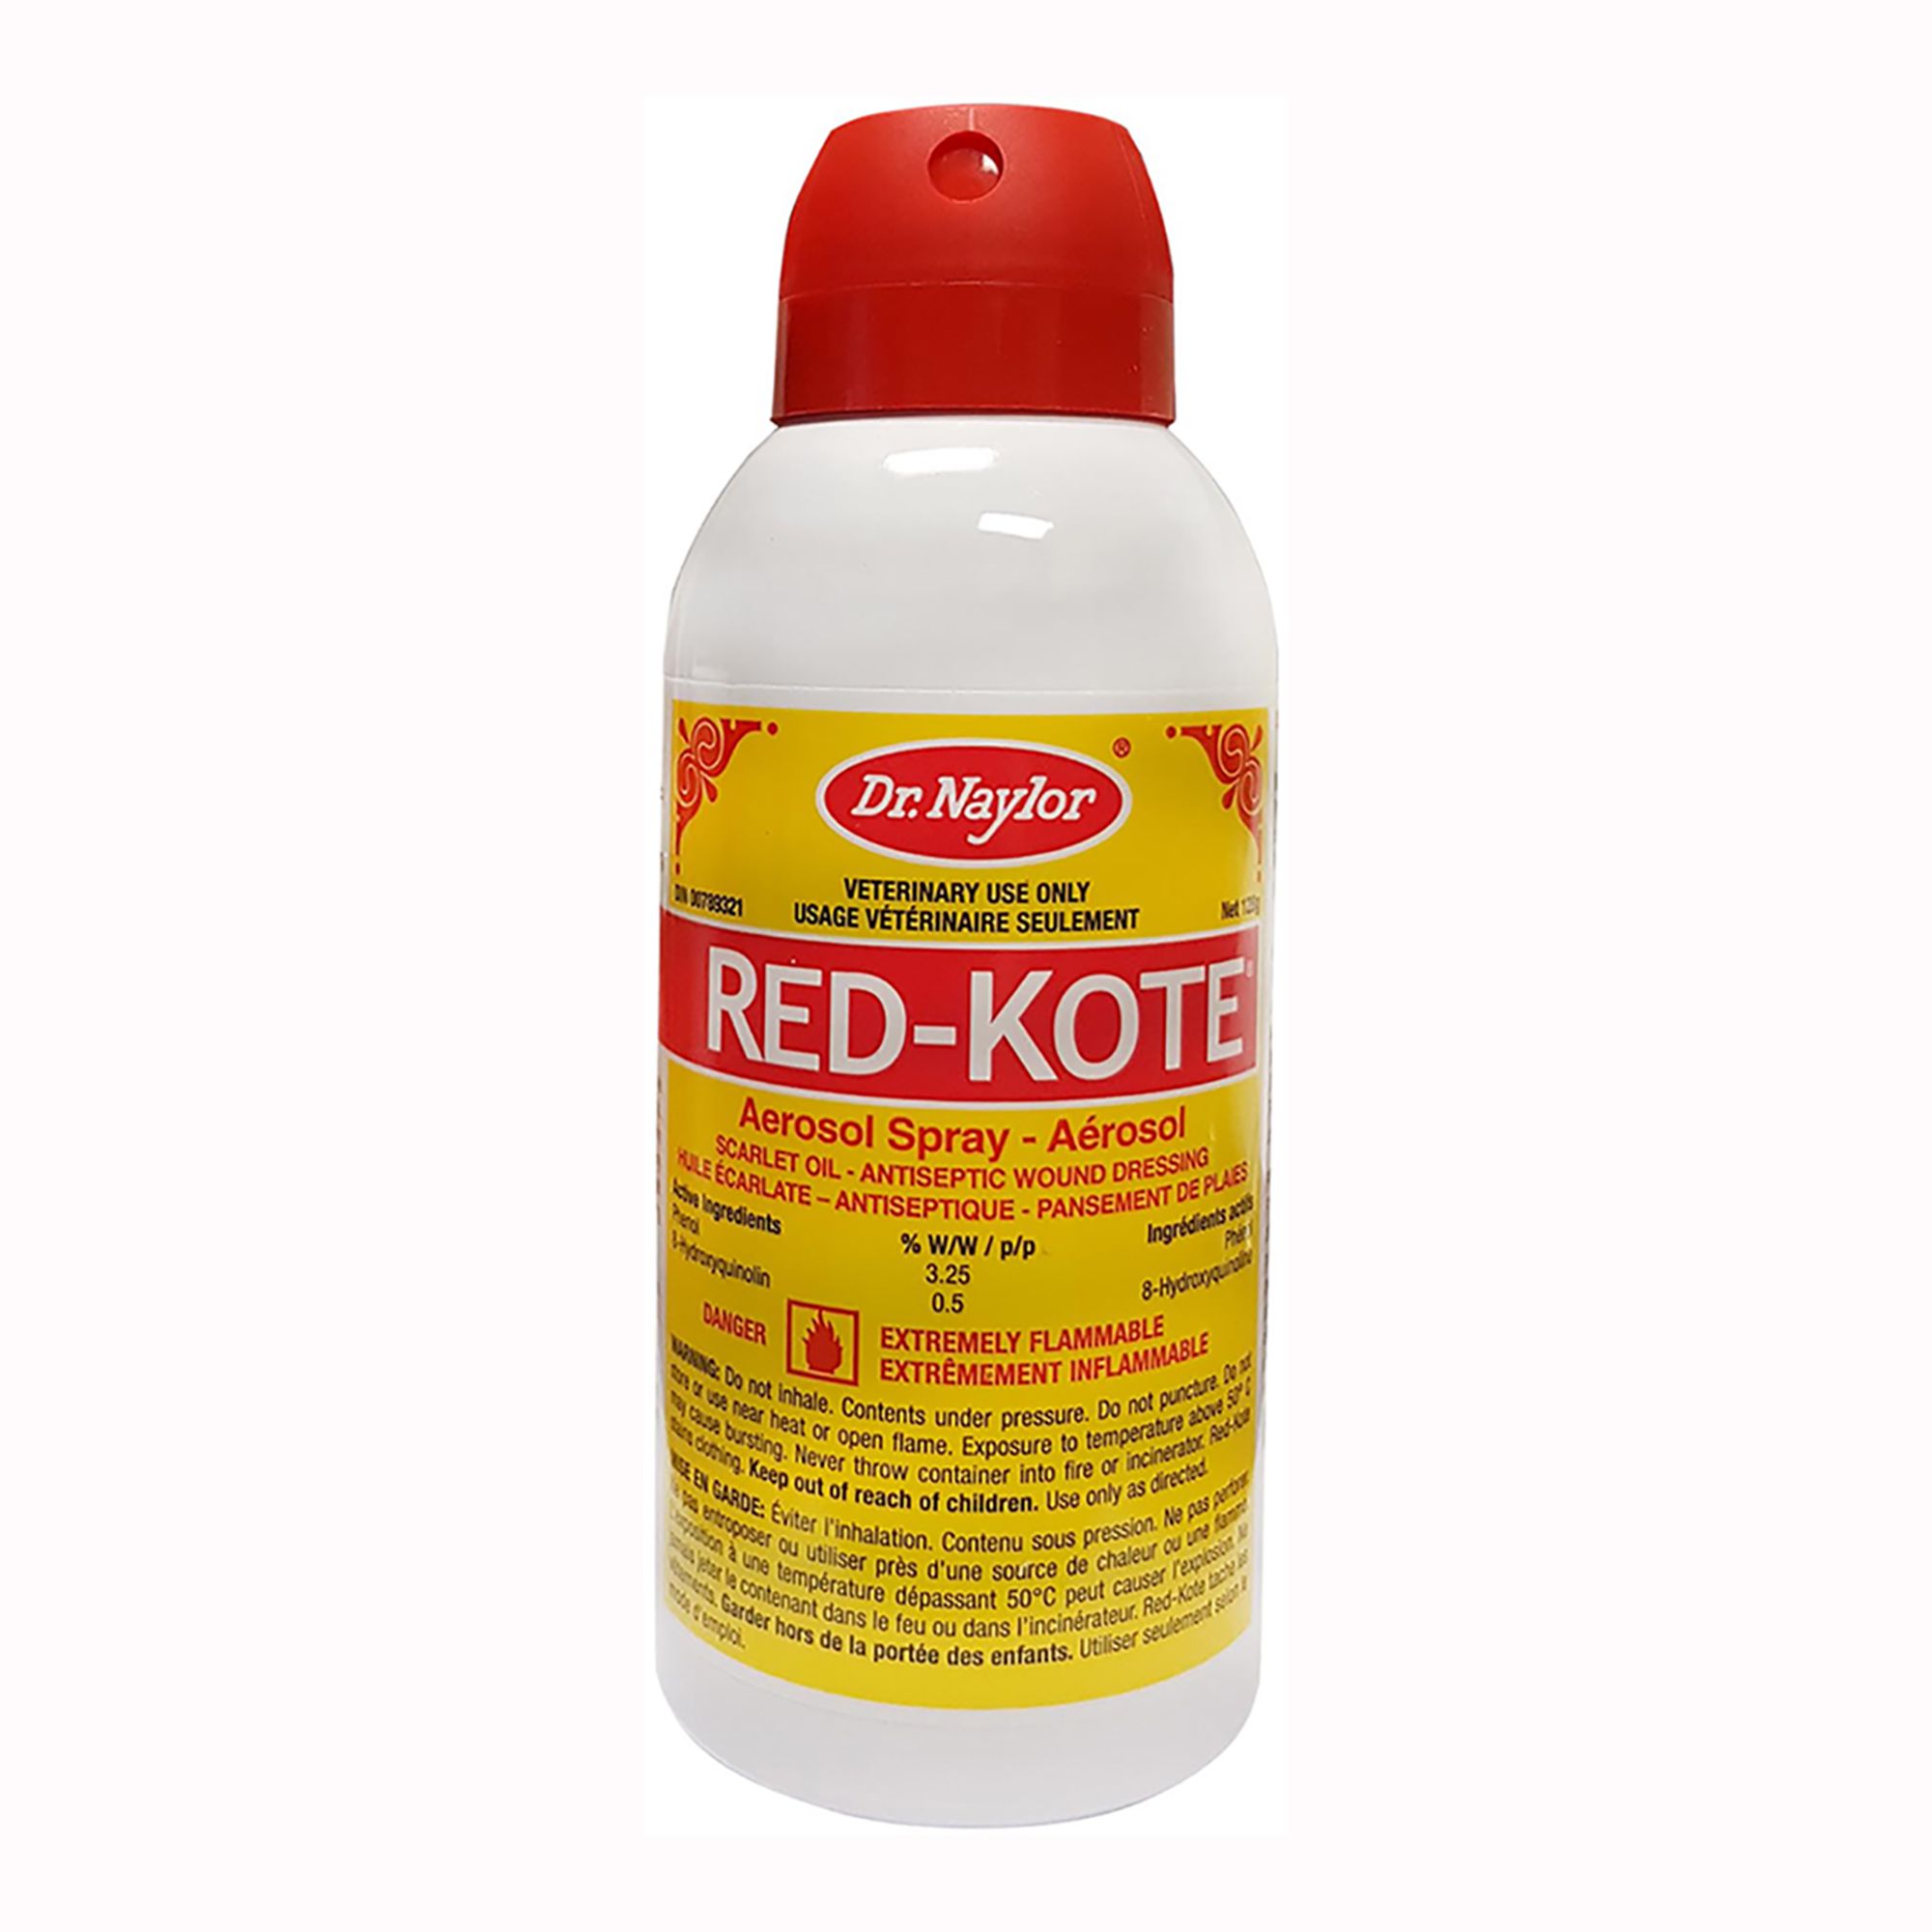 Steam kote high temperature protection фото 23